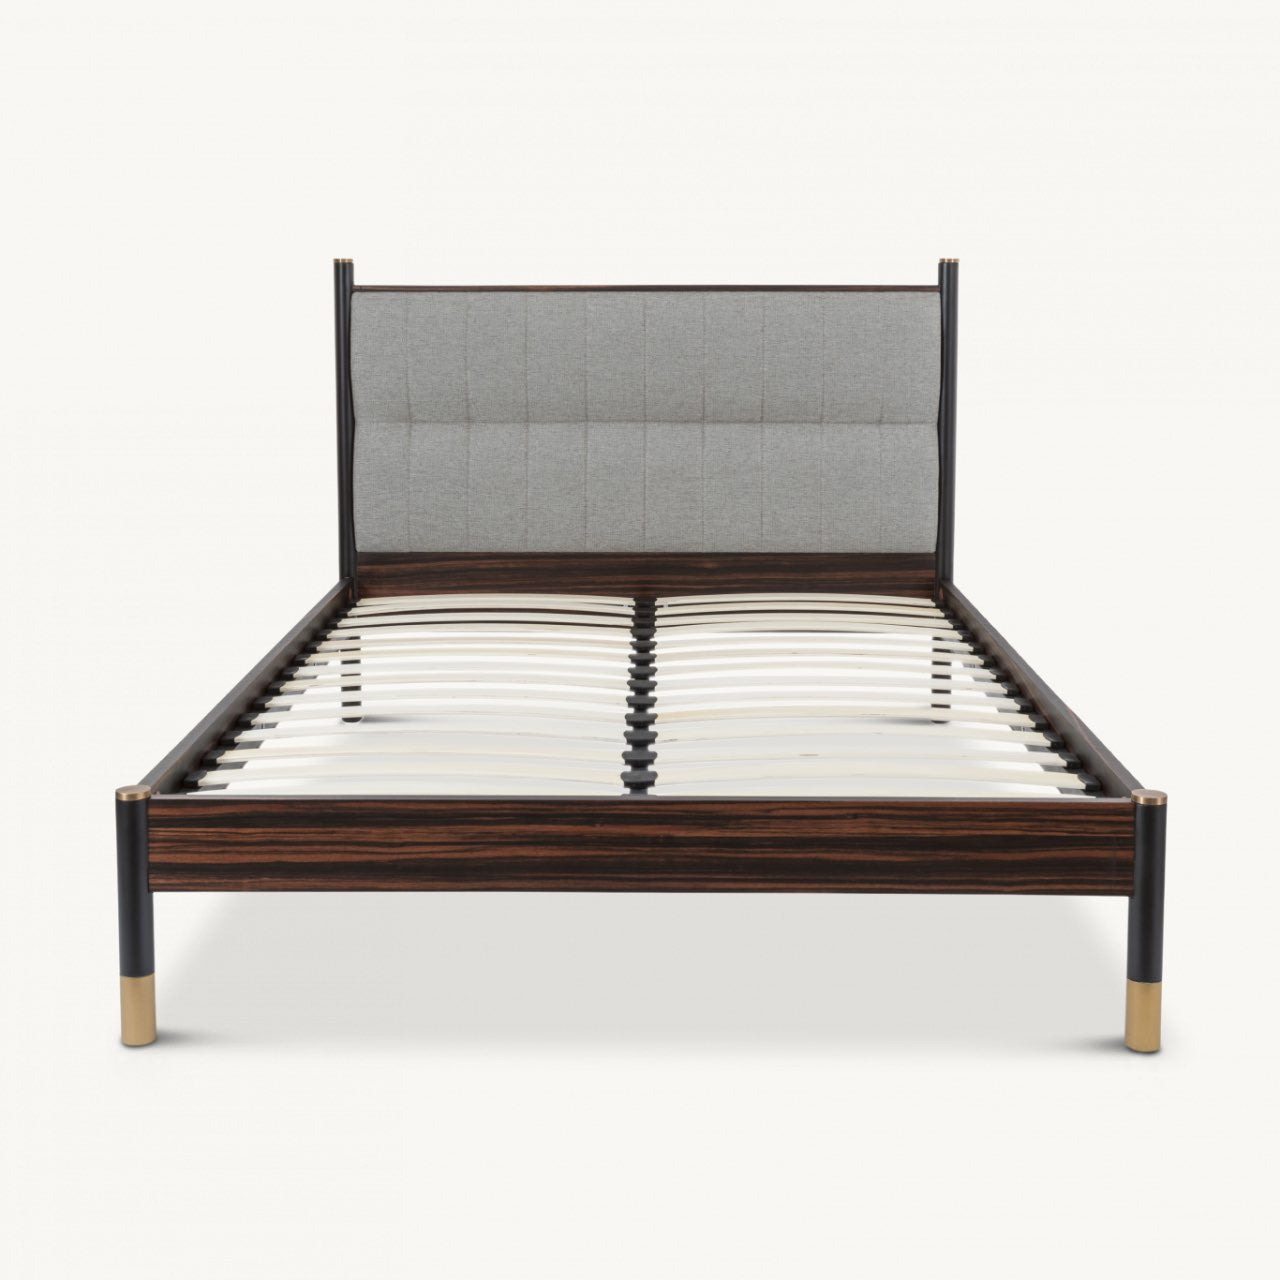 Kingsize Bali Bed with grey fabric upholstered headboard